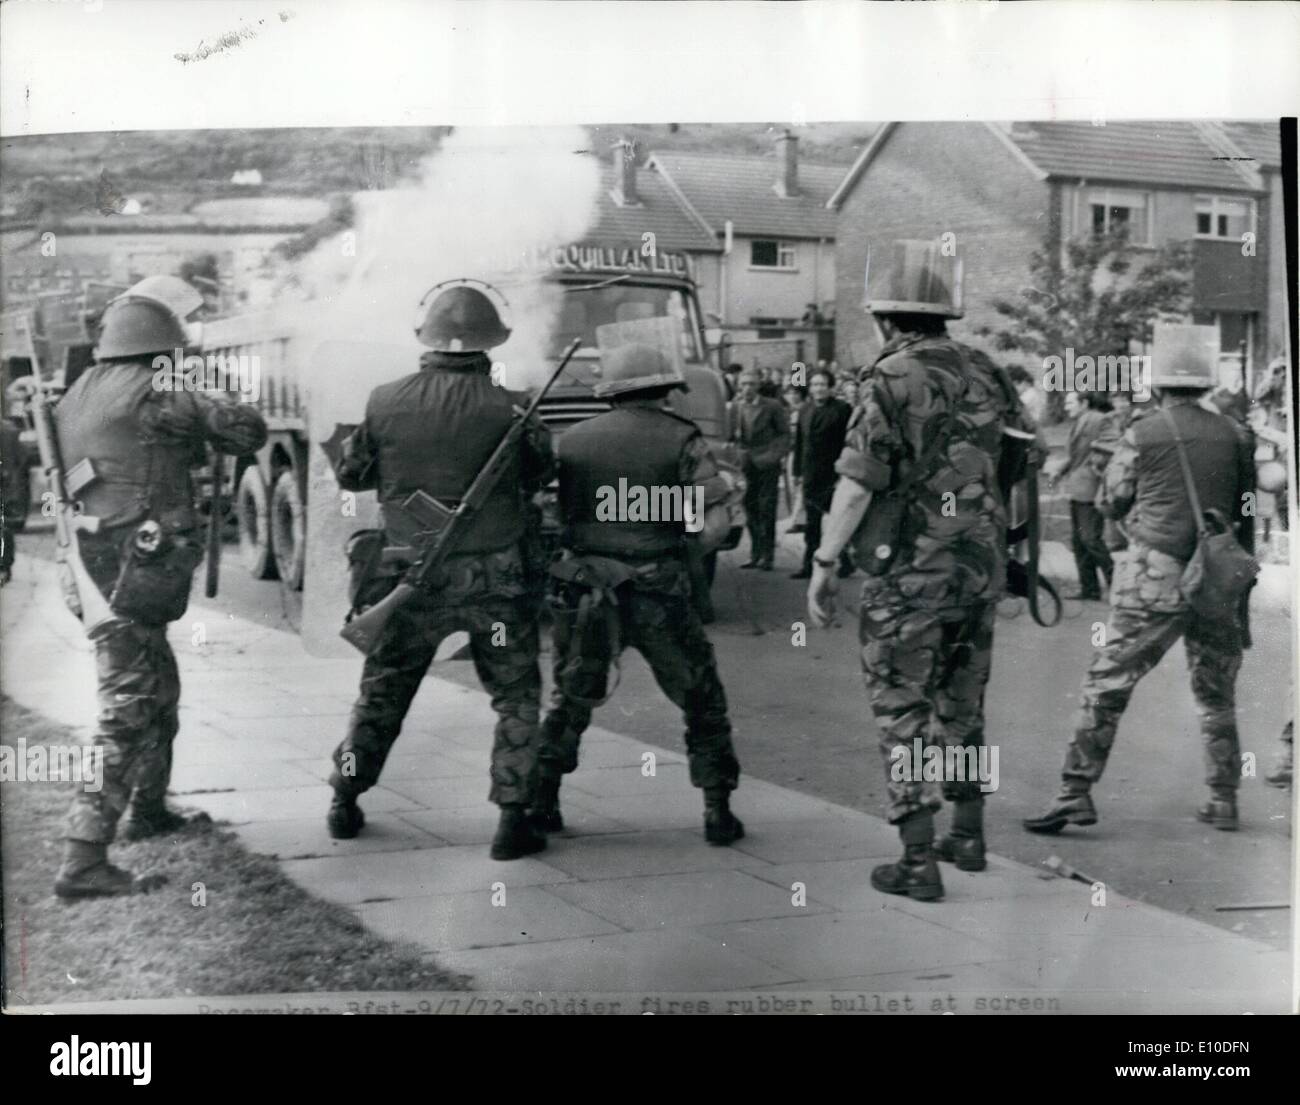 Jul. 07, 1972 - PROVISIONAL IRA CALLS OFF CEASEFIRE. Claiming that troops had broken the trucks a few hours earlier by firing rubber bullets and CS gas get Catholics on the Lenadoon eatate in Belfast, the Provisional IRA called off their two-week old Ulster ceasefire. PHOTO SHOWS: CS gas rises a soldier fires a rubber bullet at lorry carrying furniture which was heading a group of several hundred Catholic in Lenadoon district of Belfast. The crowd were attempting to install Catholics families in vacant houses. Stock Photo